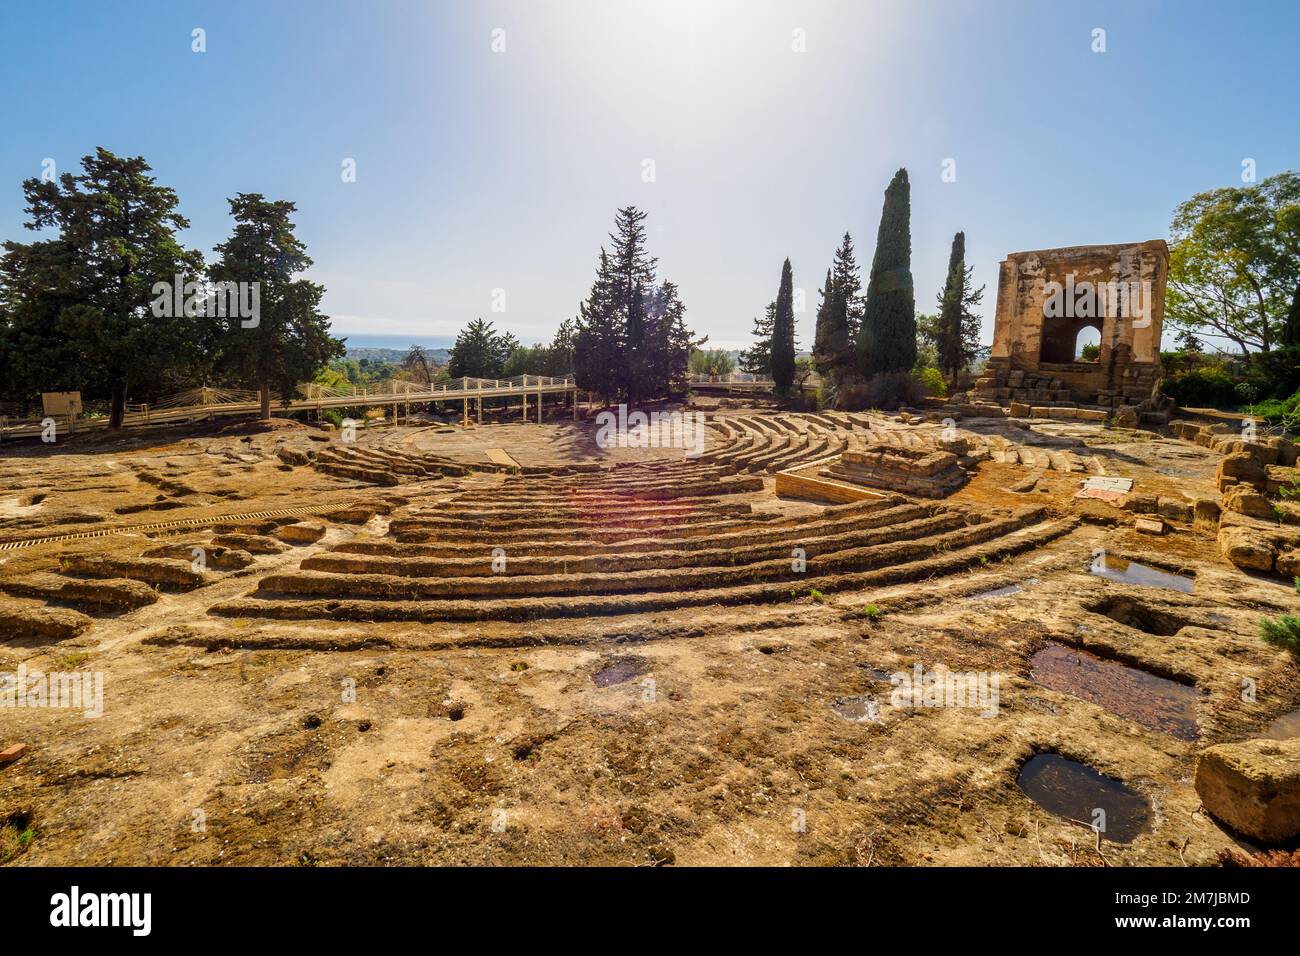 Ekklesiasterion and Oratorium of Phalaris. The Ekklesiasterion was the building in which the meeting of the ekklesia (the people assembly) were house and it was close to the sacred complex of the Chthonic deities. Stock Photo